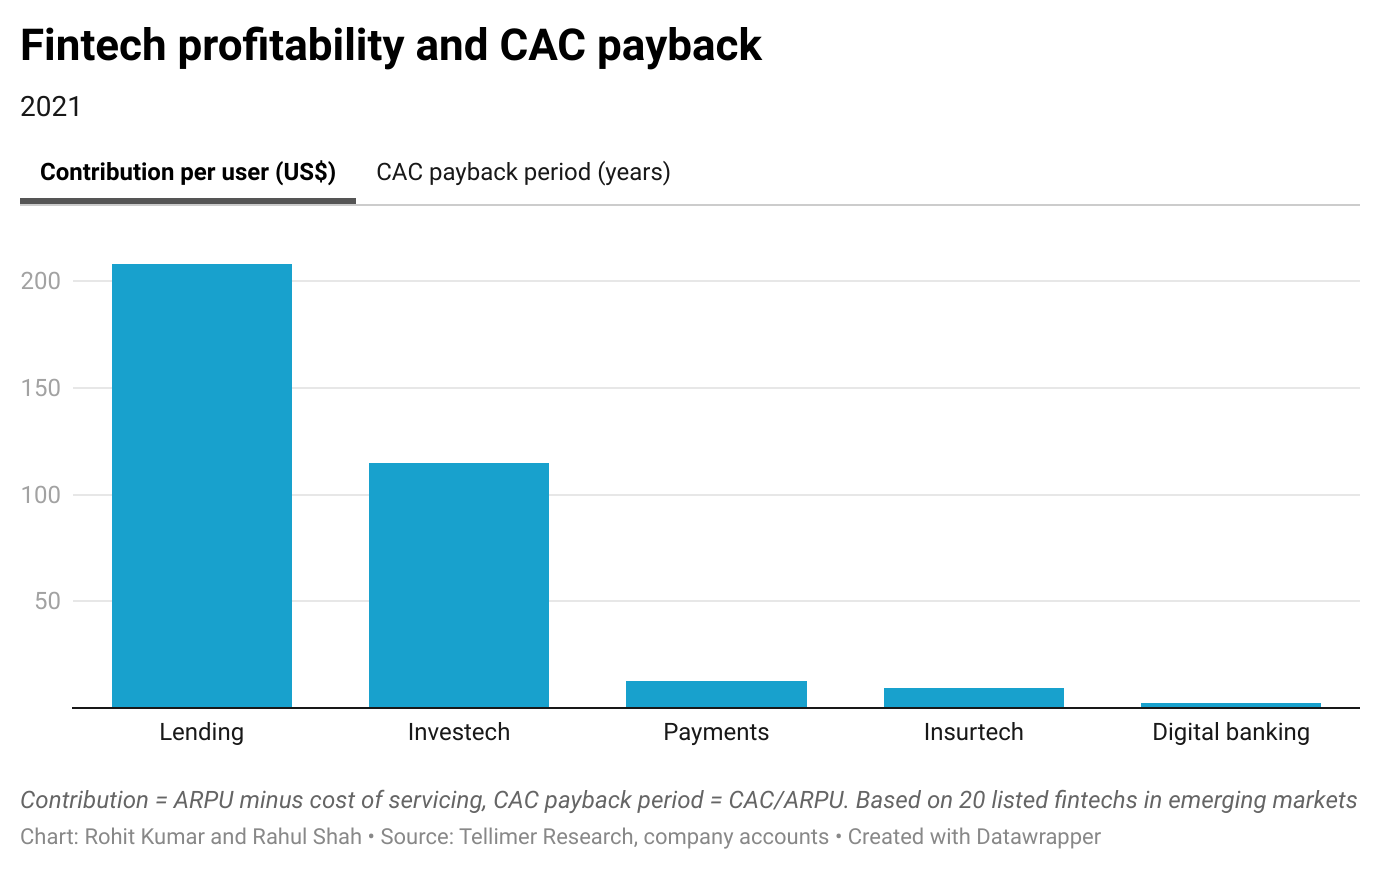 Fintech profitability and CAC payback